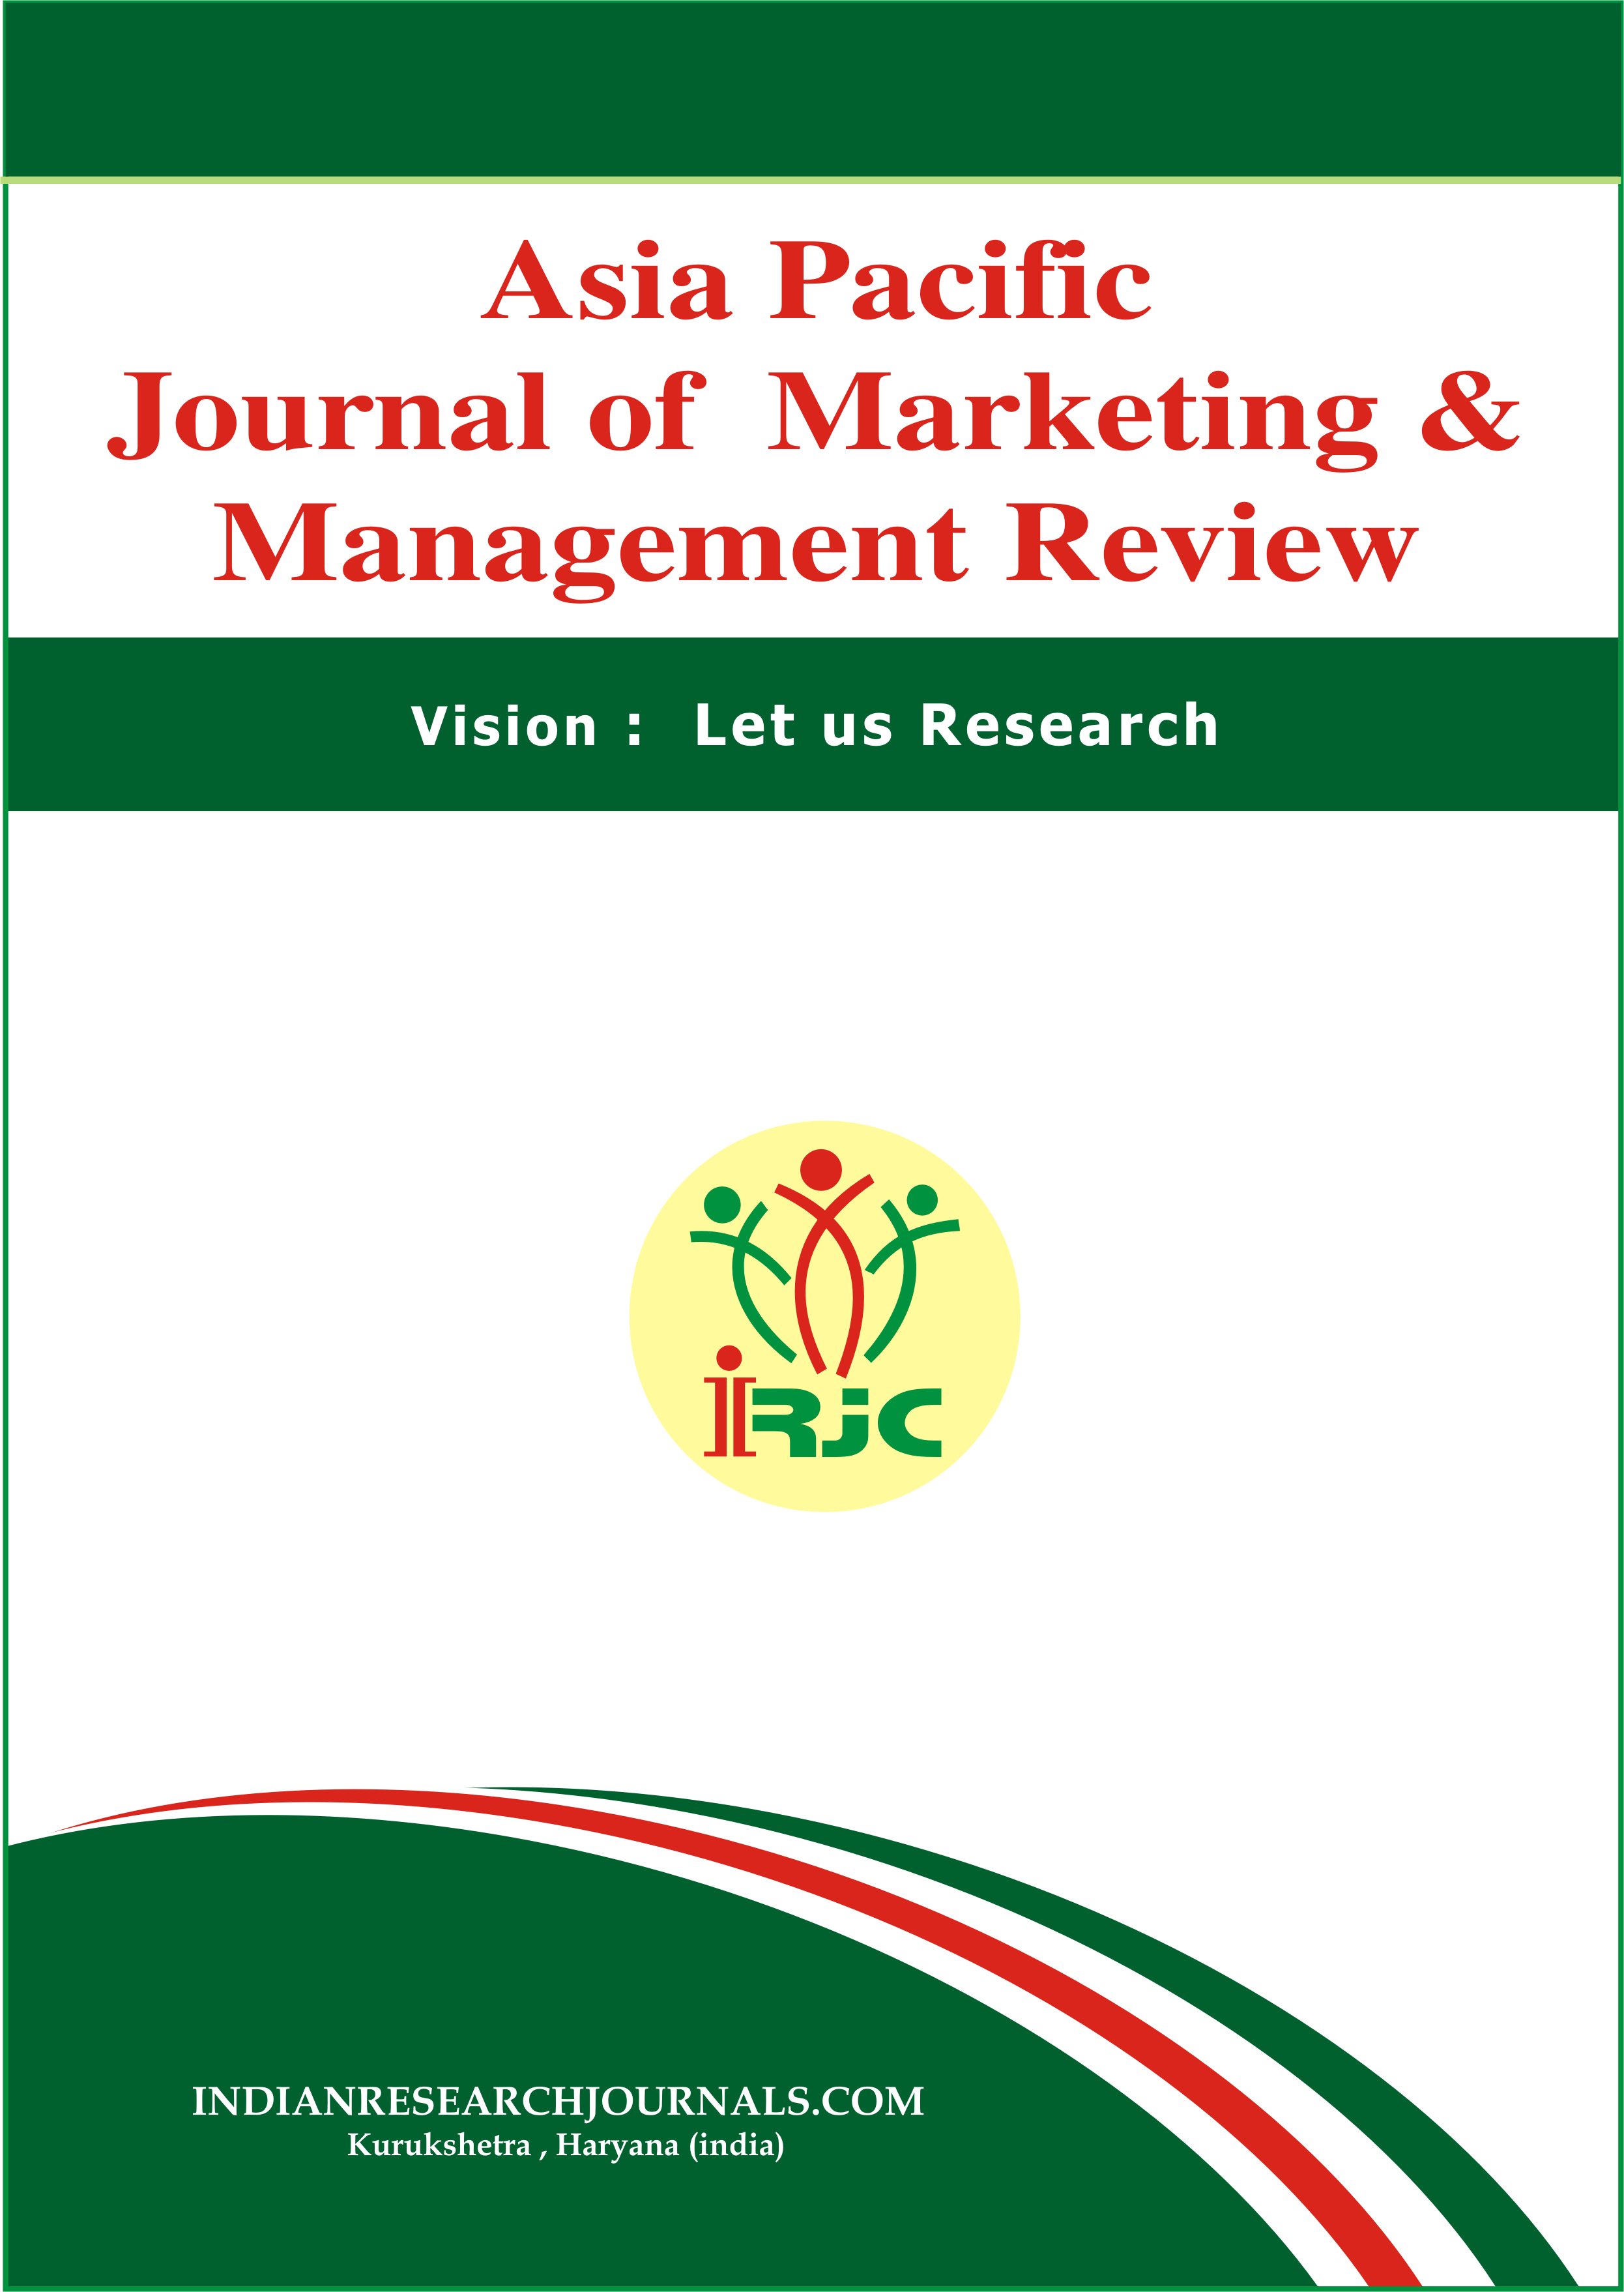 					View Vol. 12 No. 03 (2023): ASIA PACIFIC JOURNAL OF MARKETING & MANAGEMENT REVIEW
				